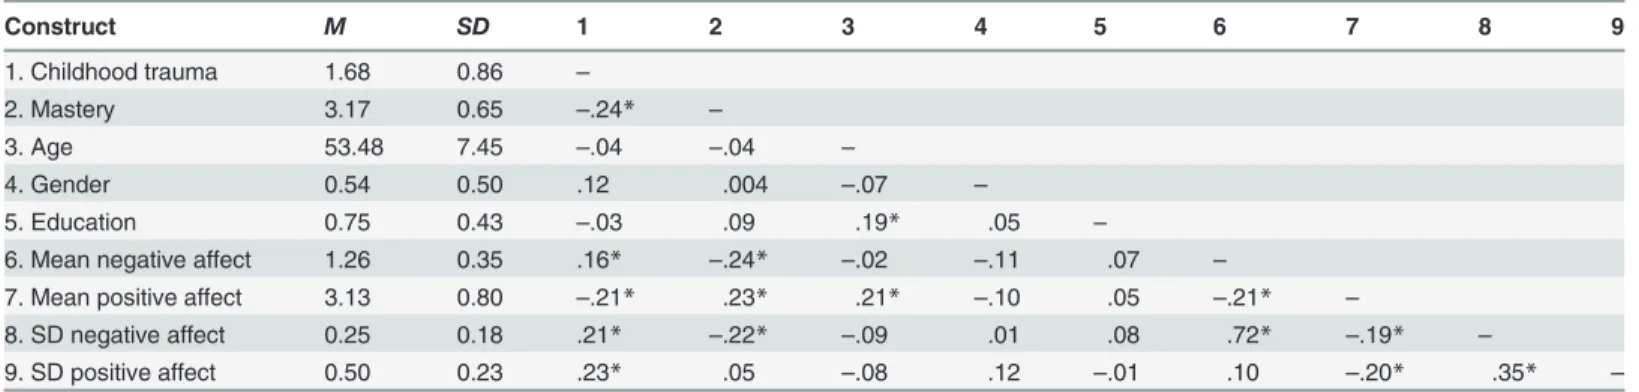 Table 2. Means, standard deviations, and intercorrelations among the constructs included in the study.